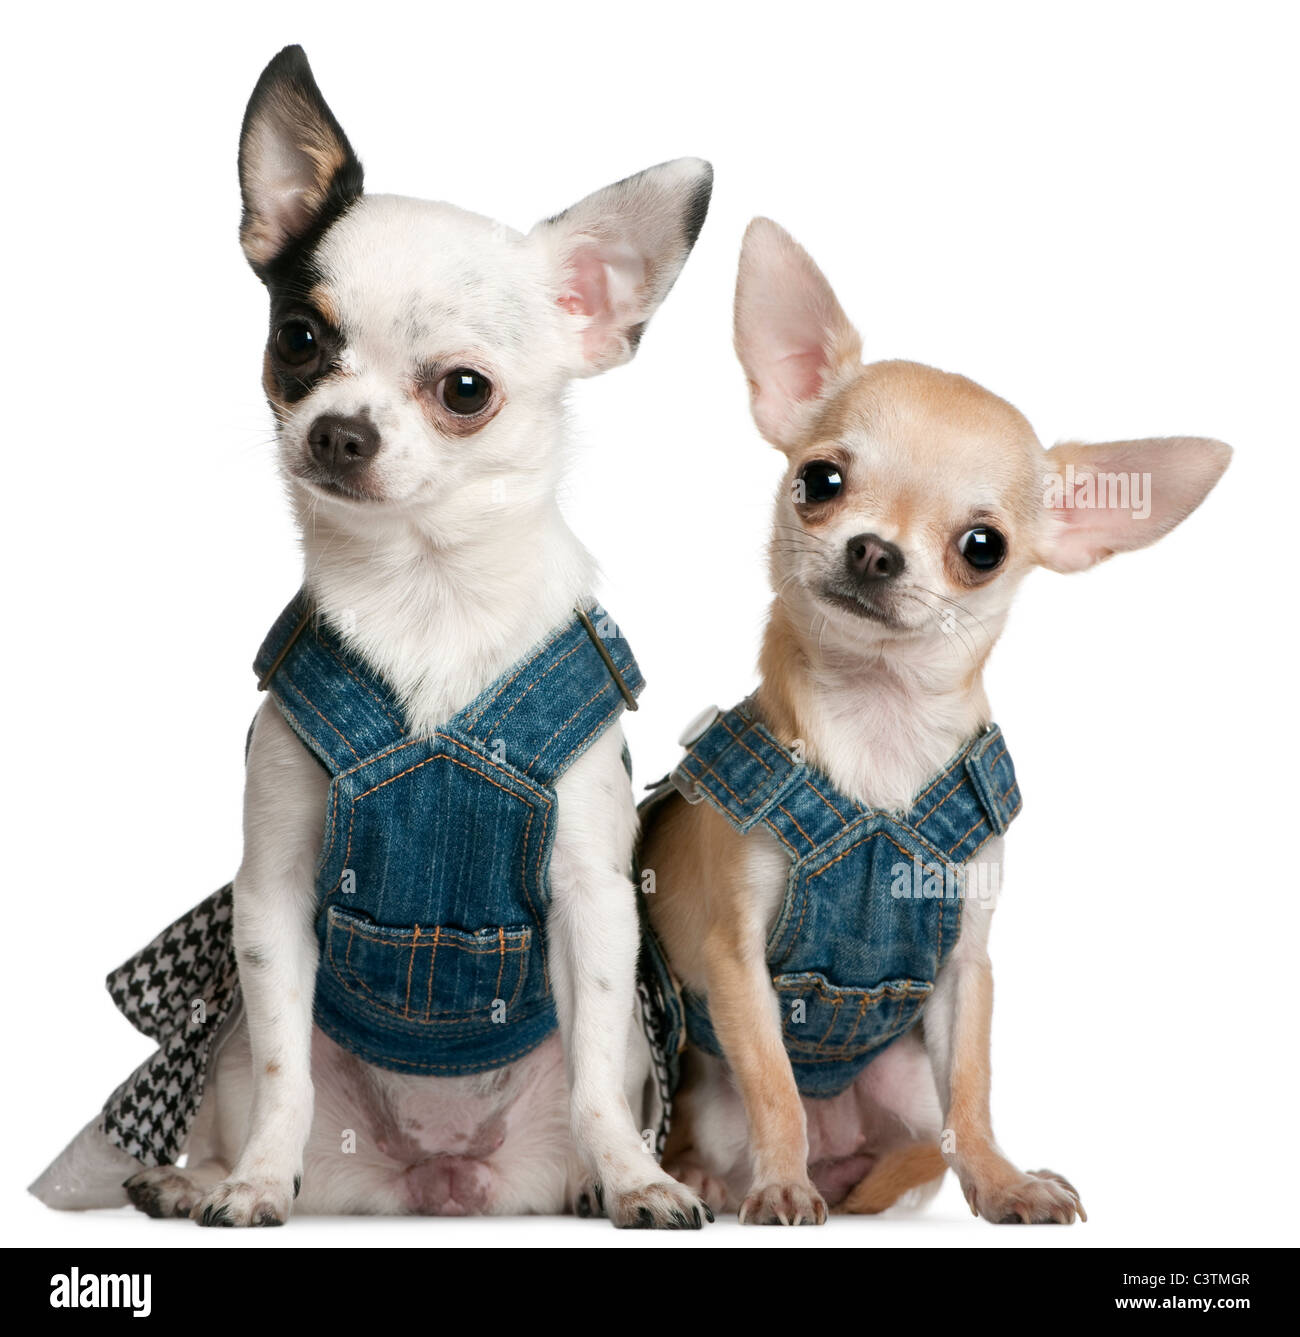 Chihuahuas wearing denim, 1 year old and 11 months old, sitting in front of white background Stock Photo